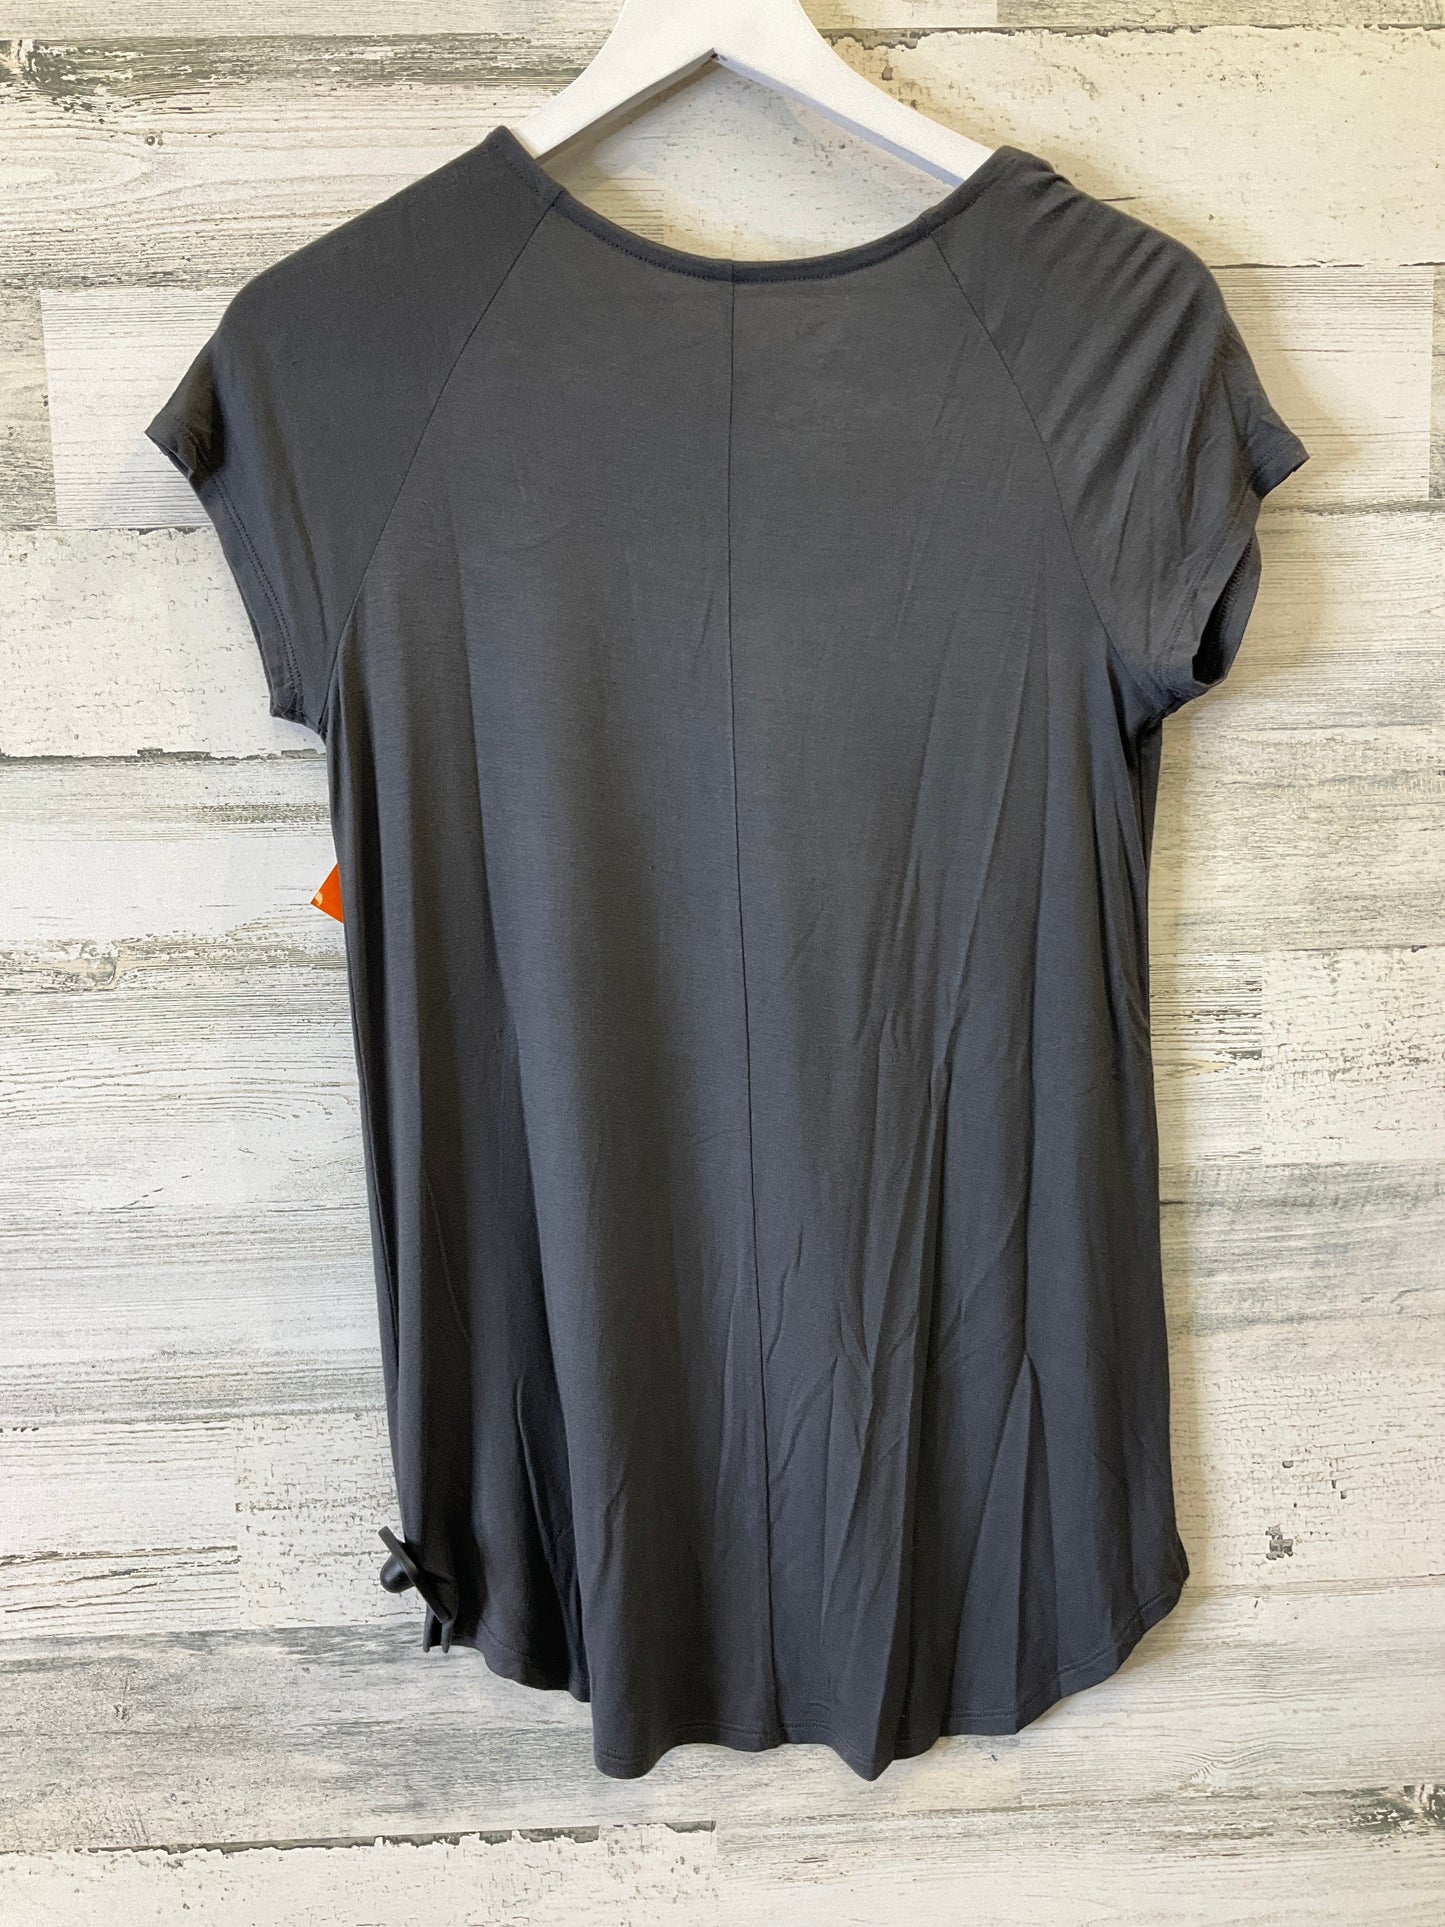 Grey Top Short Sleeve Maurices, Size Xs